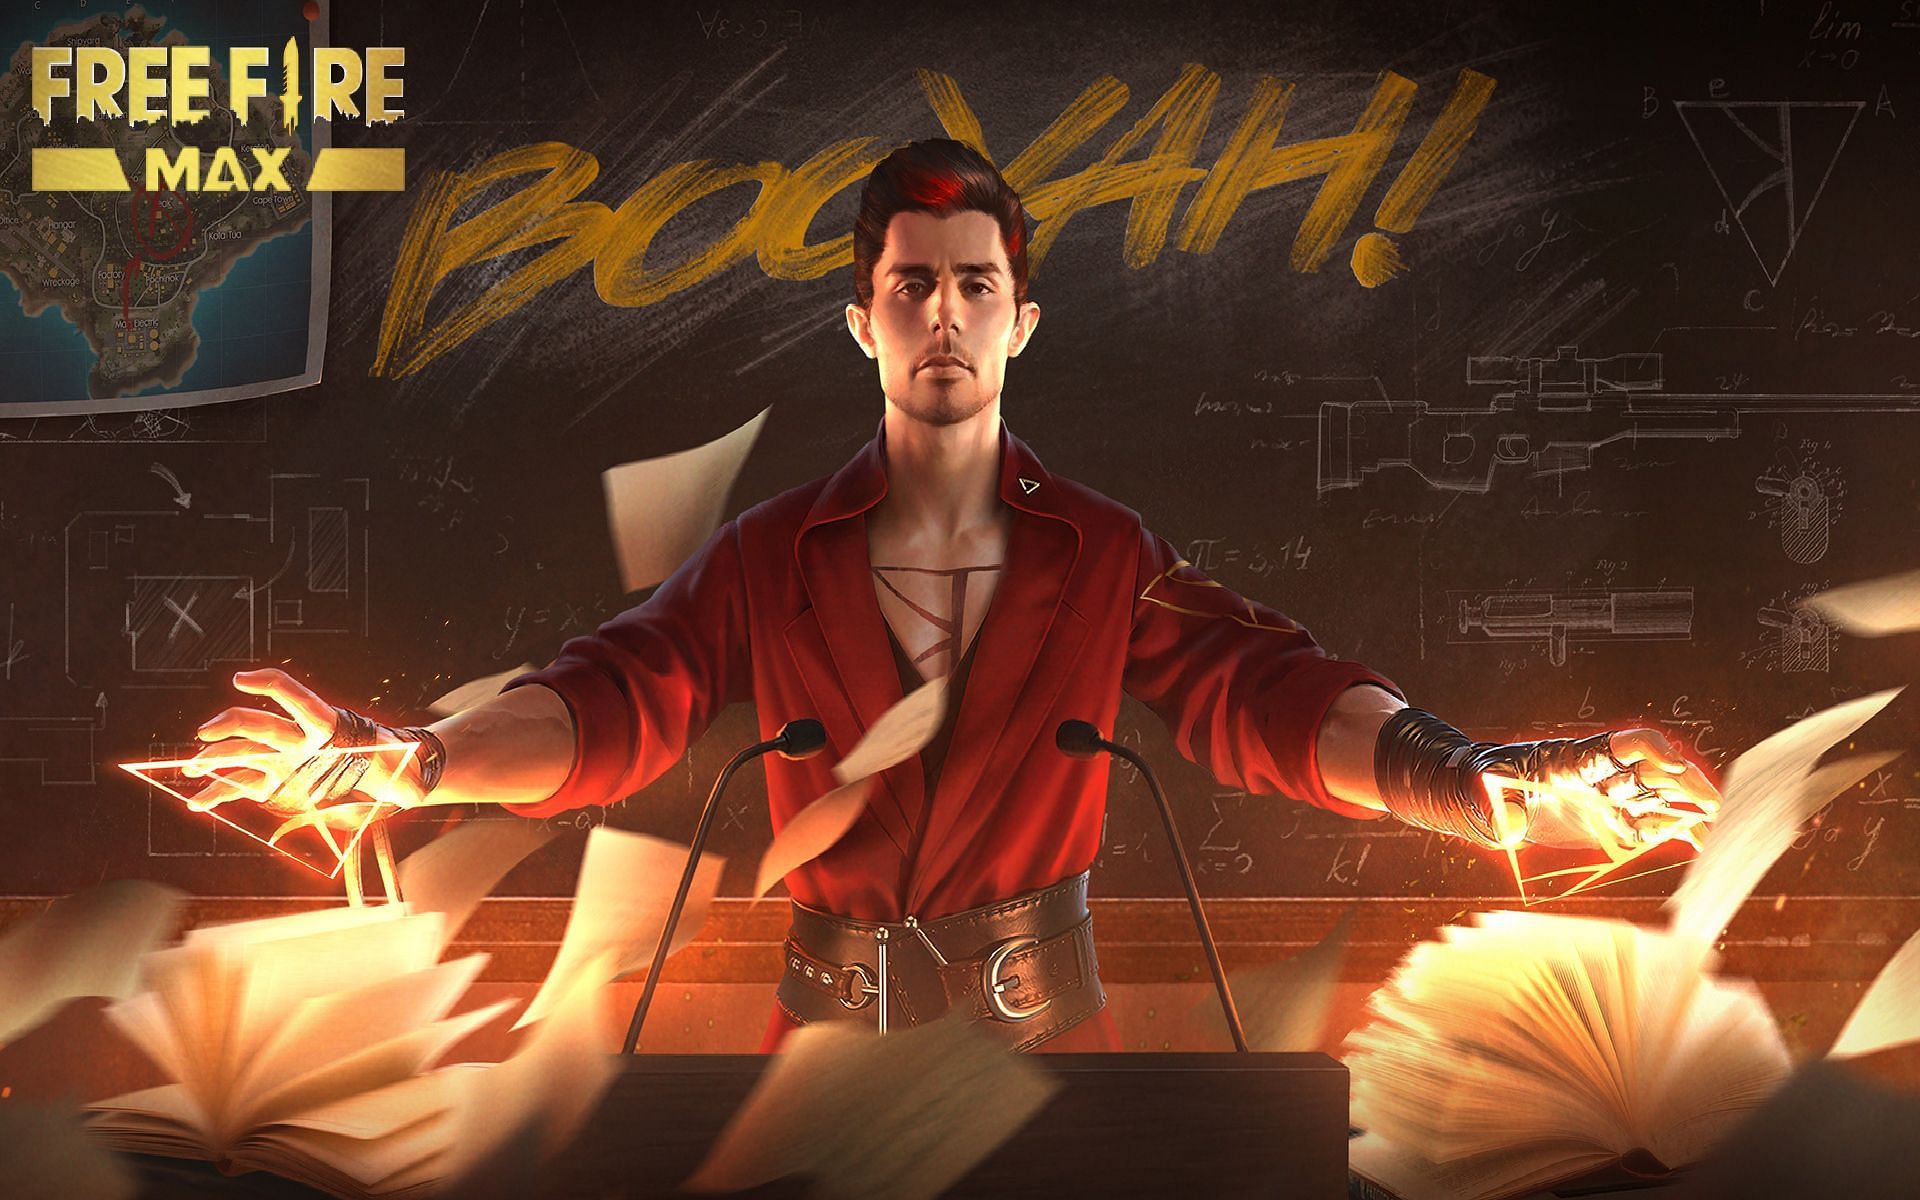 Follow these tips to get more Booyah in Free Fire MAX (Image via Garena Free Fire MAX)